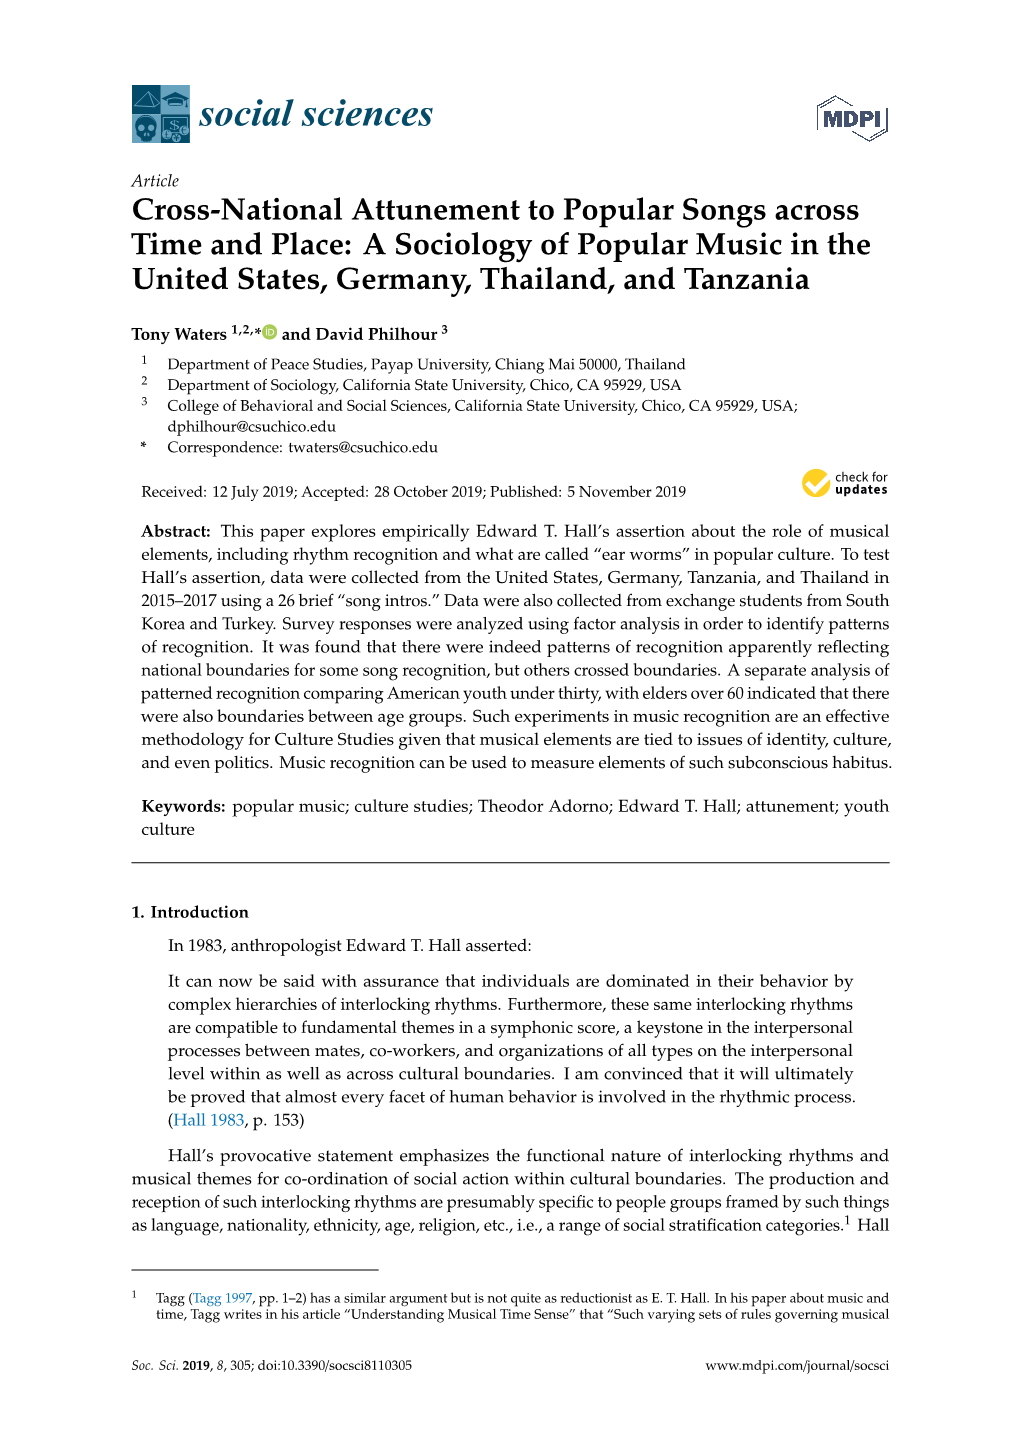 Cross-National Attunement to Popular Songs Across Time and Place: a Sociology of Popular Music in the United States, Germany, Thailand, and Tanzania